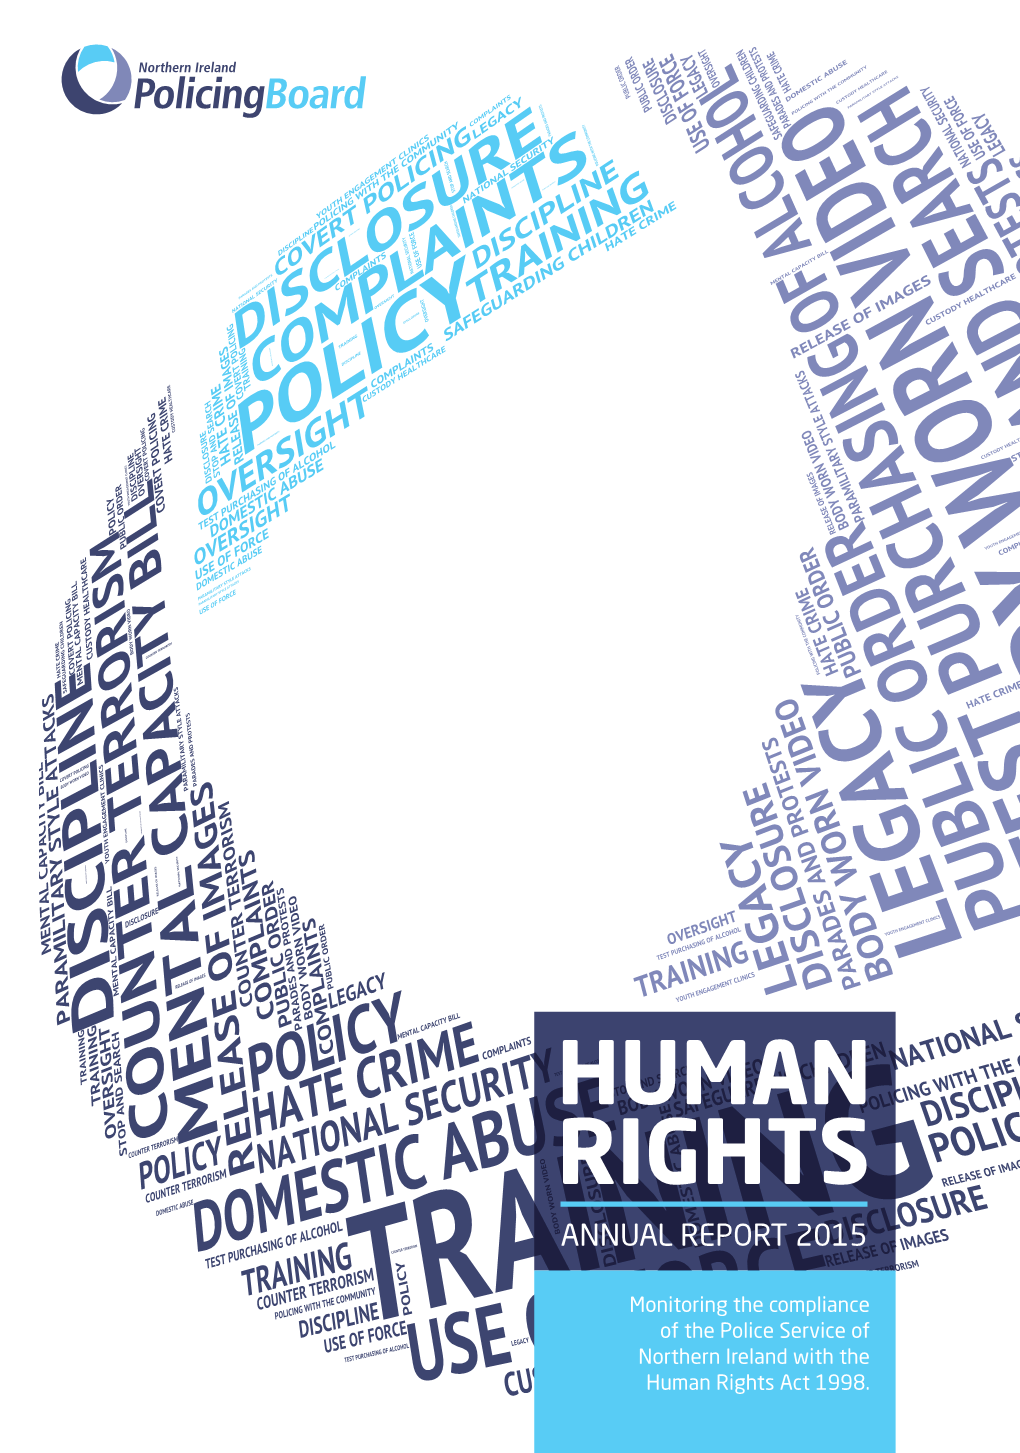 Human Rights Annual Report 2015